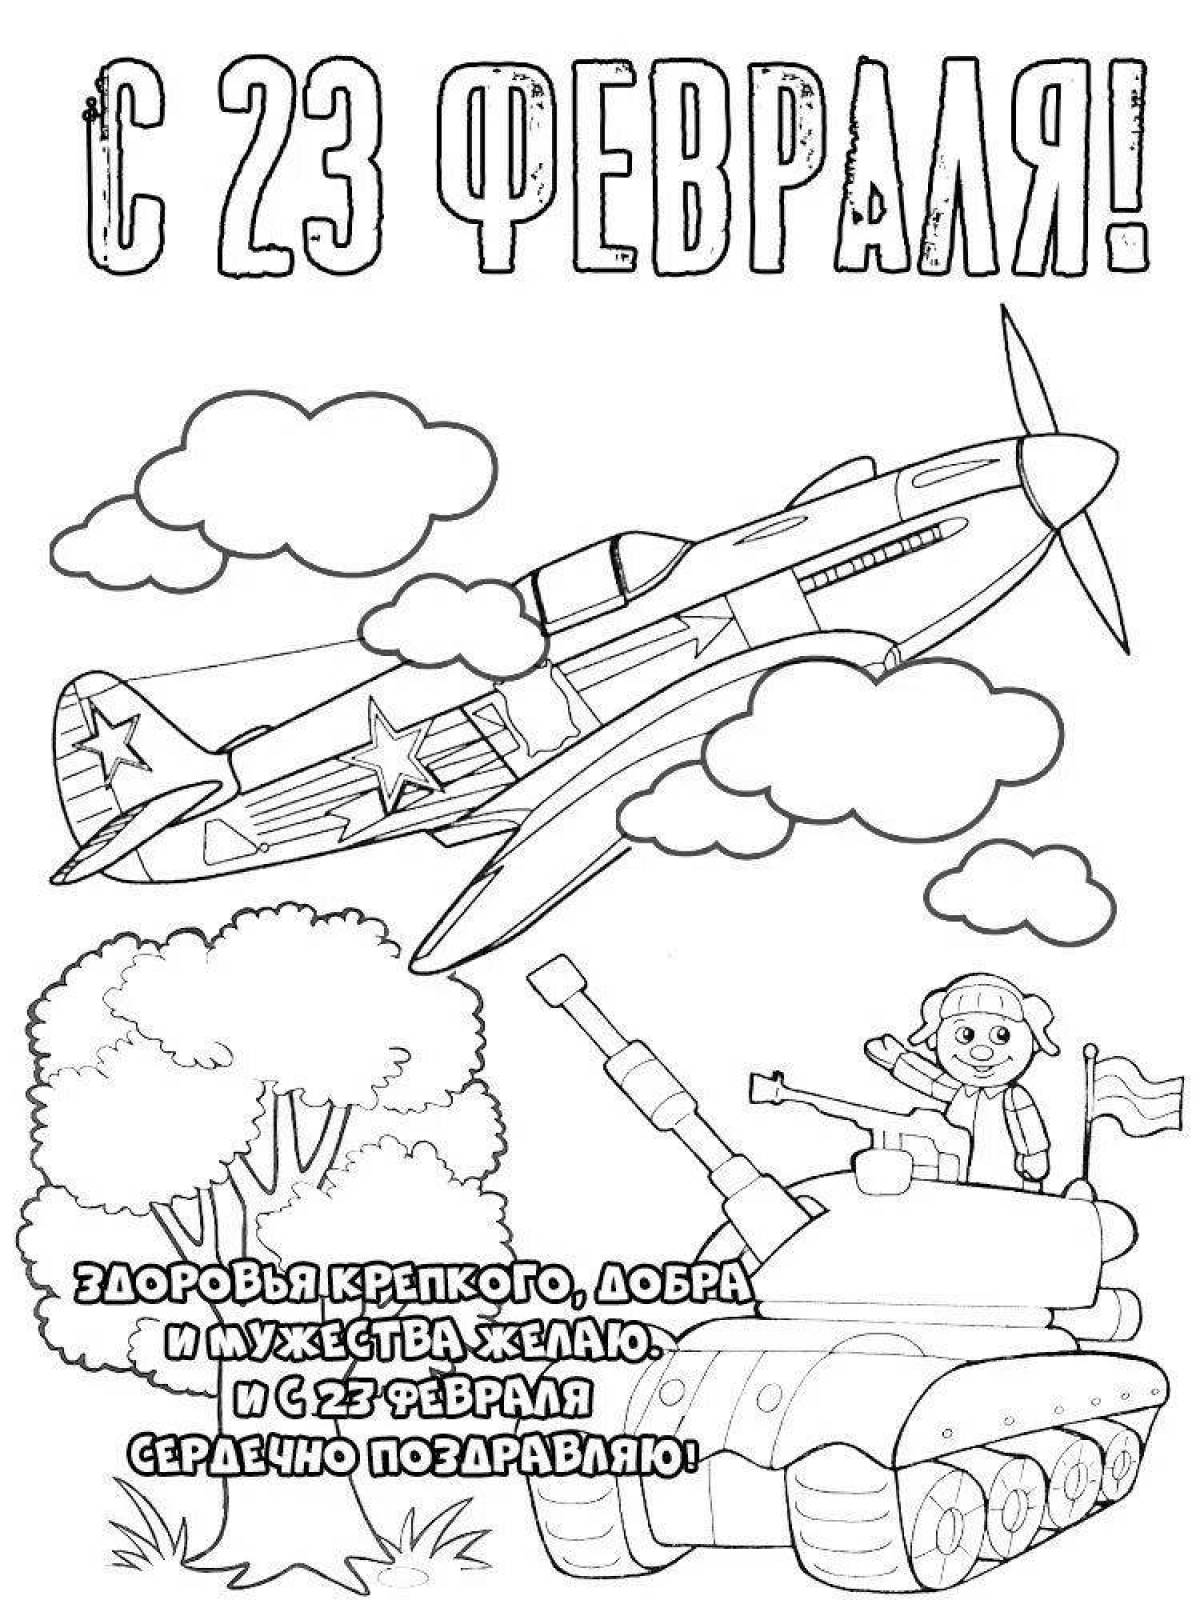 Charming coloring book for February 23rd in elementary school